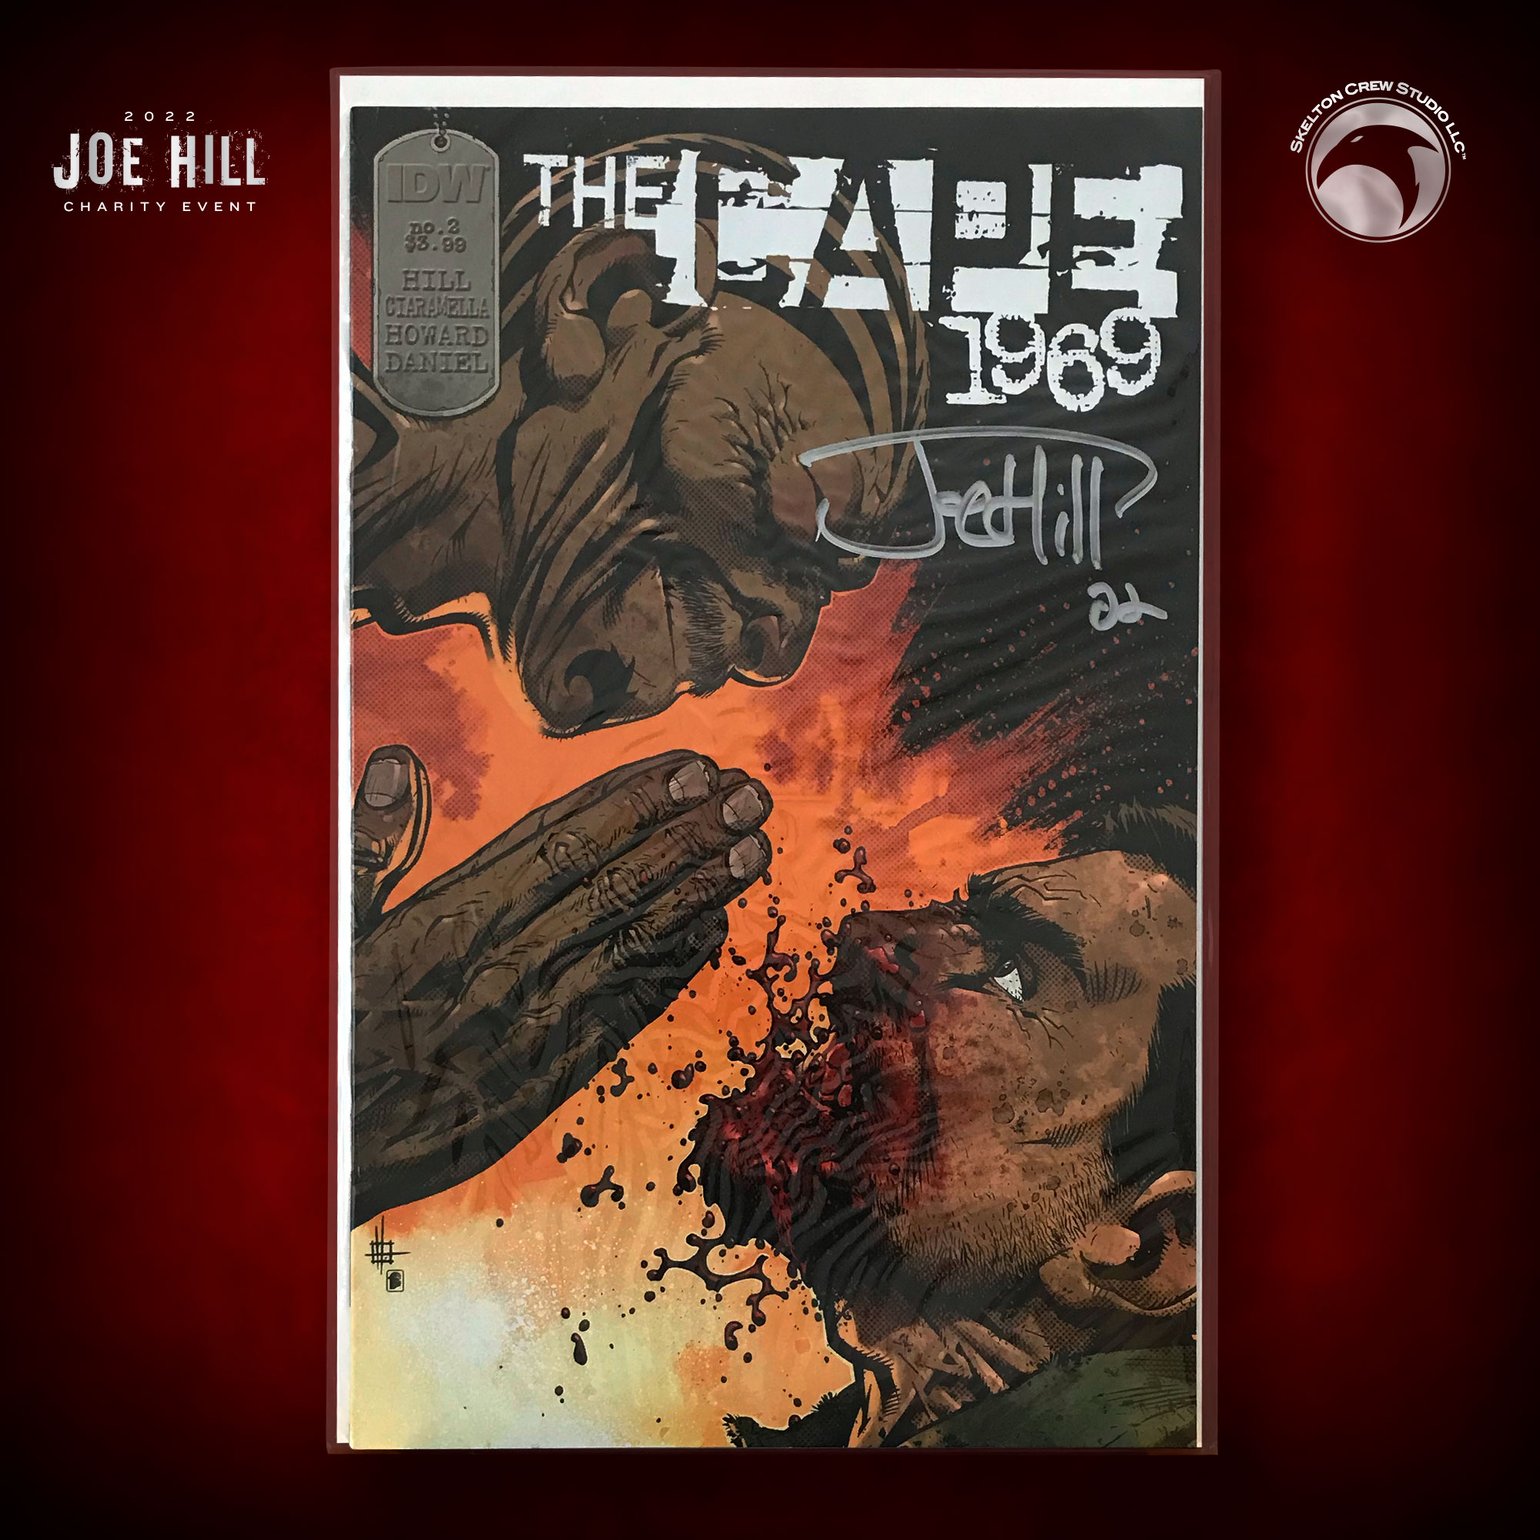 Image of JOE HILL 2022 CHARITY EVENT 60: SIGNED "The Cape 1969" #2